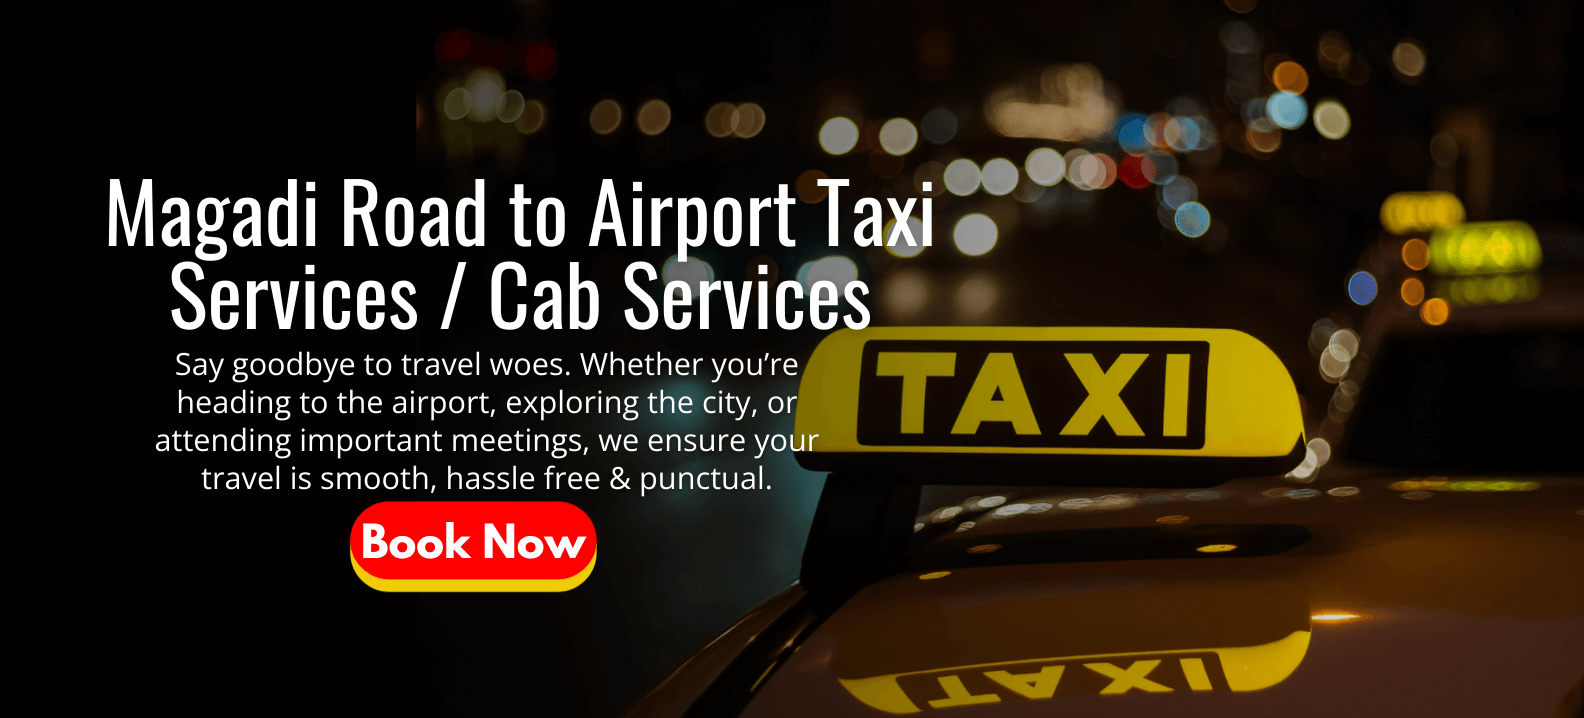 Magadi Road to Airport Taxi Services _ Cab Services